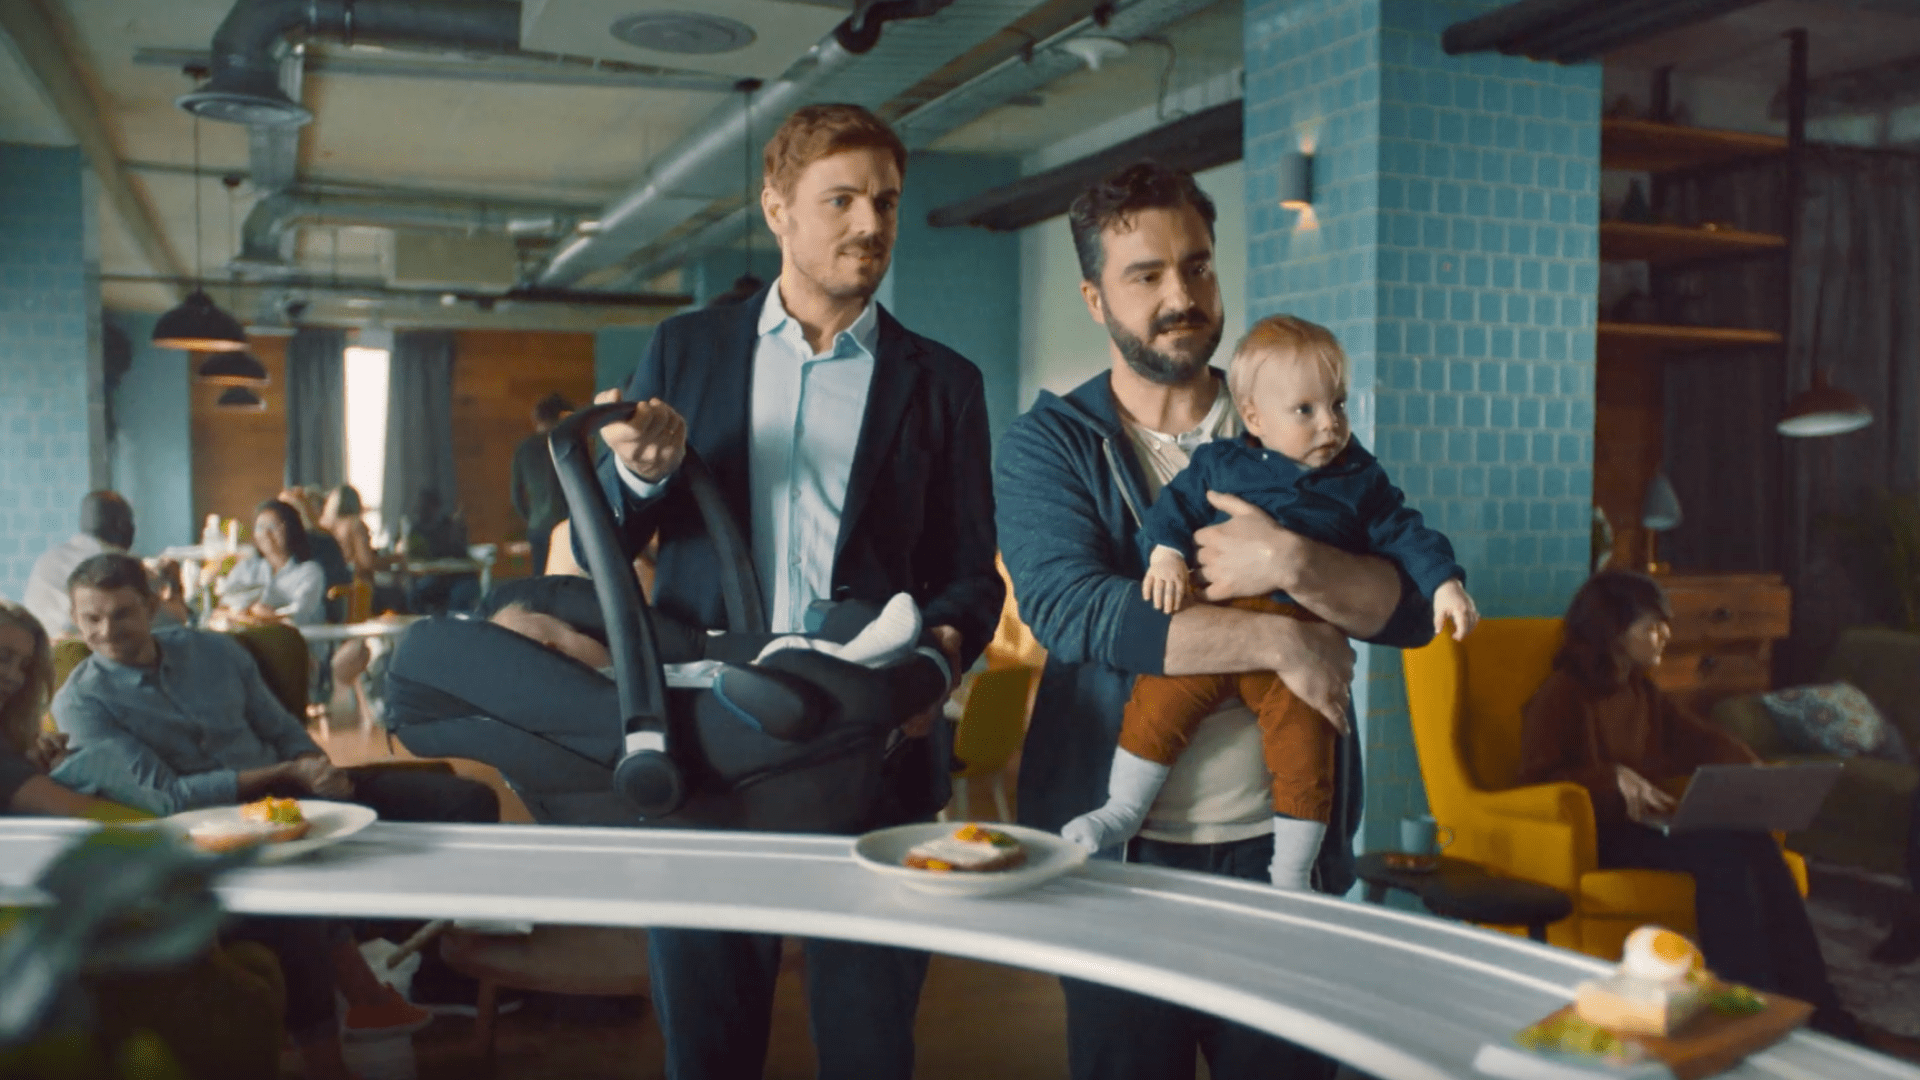 Women More Likely To Find Ad Banned By ASA For Portraying Men As Bad Parents Sexist